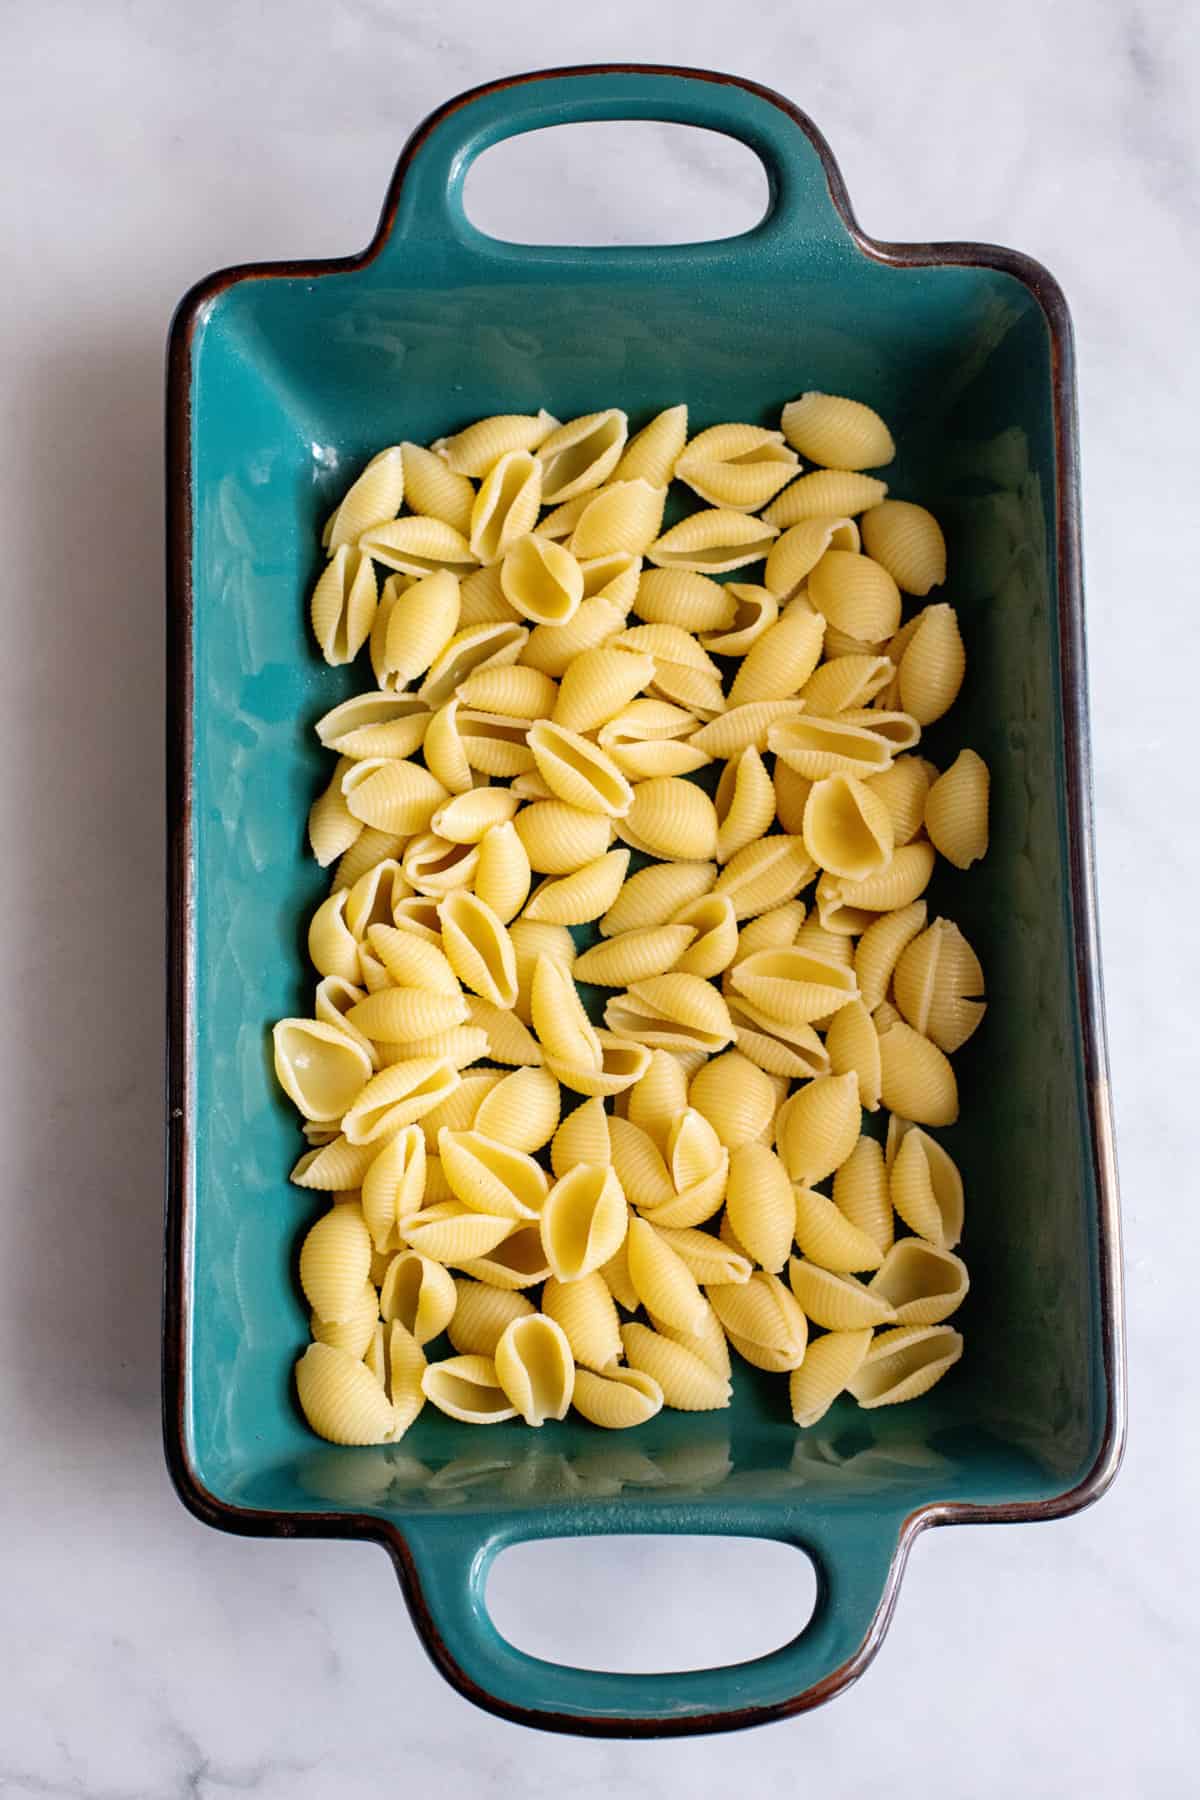 Place cooked pasta in baking dish.